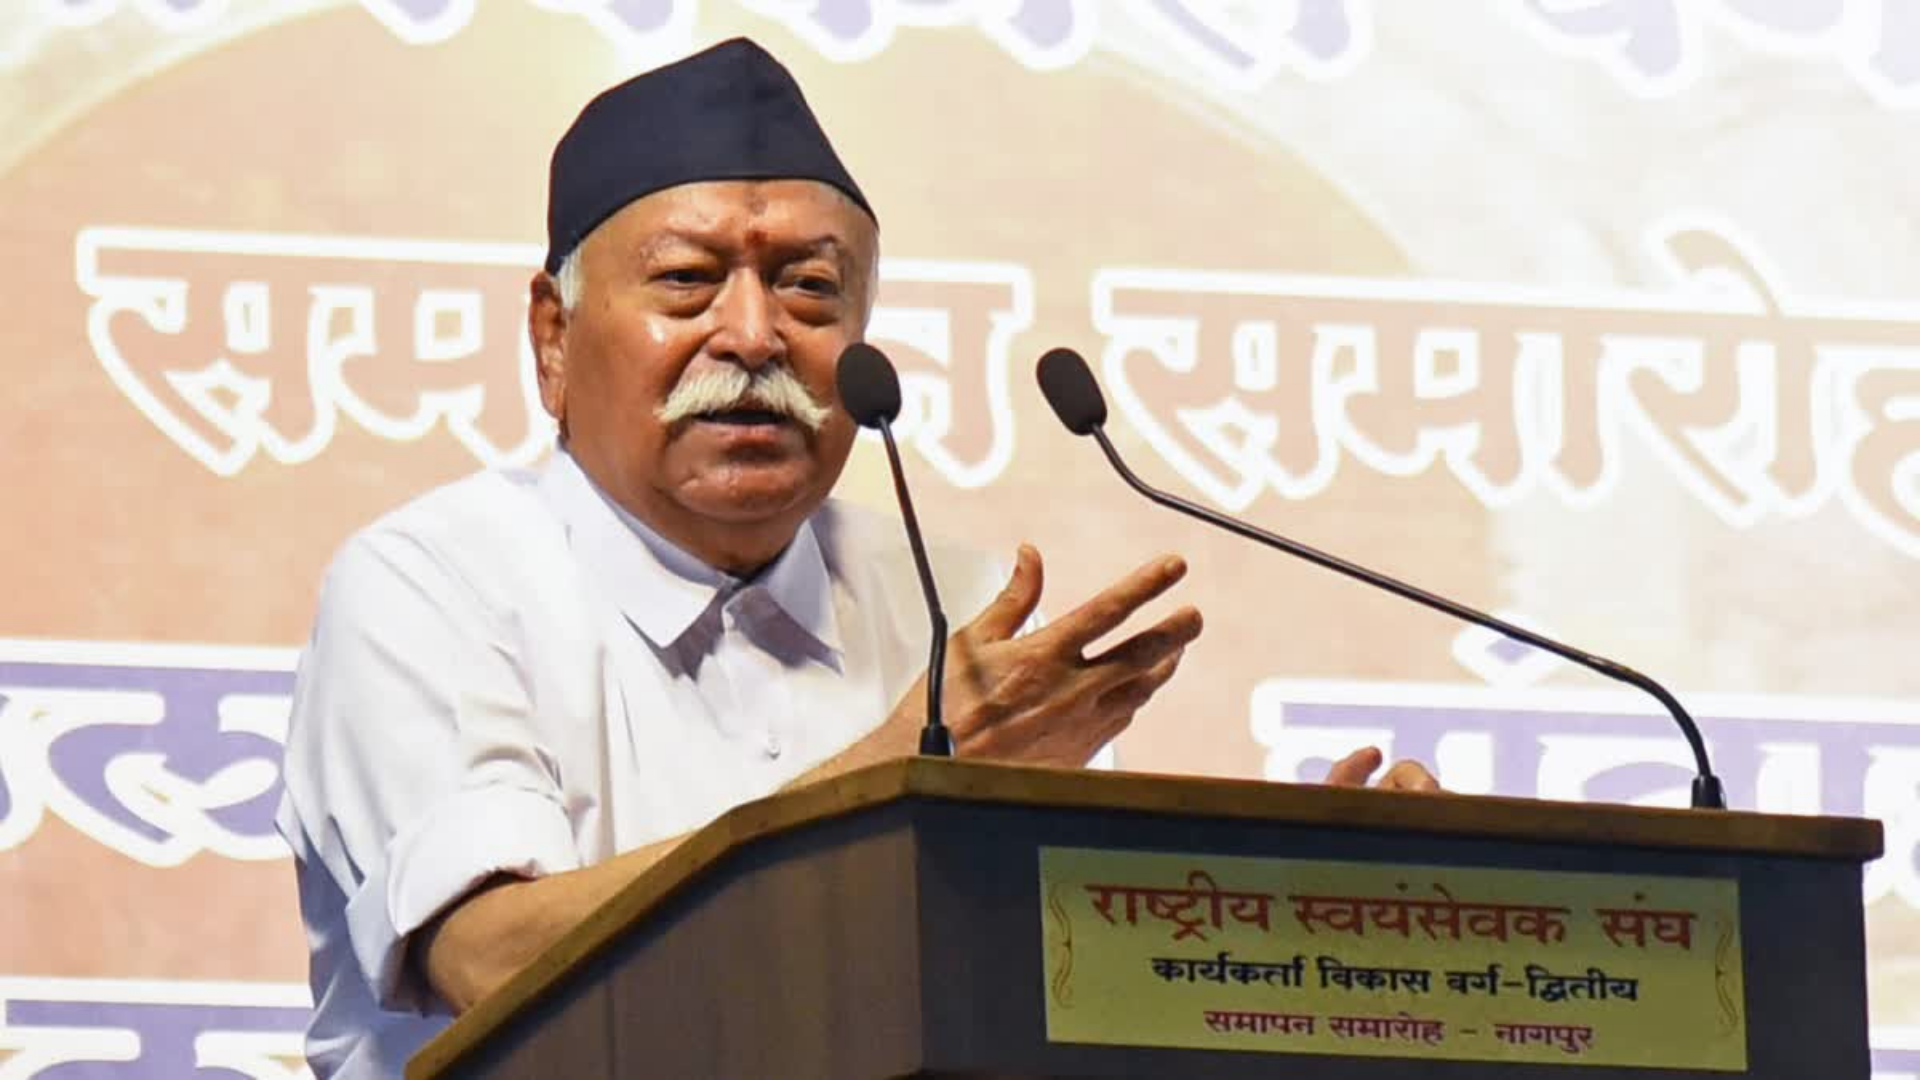 ‘Prant Pracharak: ‘RSS’ Annual Meeting Scheduled For July 12 To July 14 In Ranchi